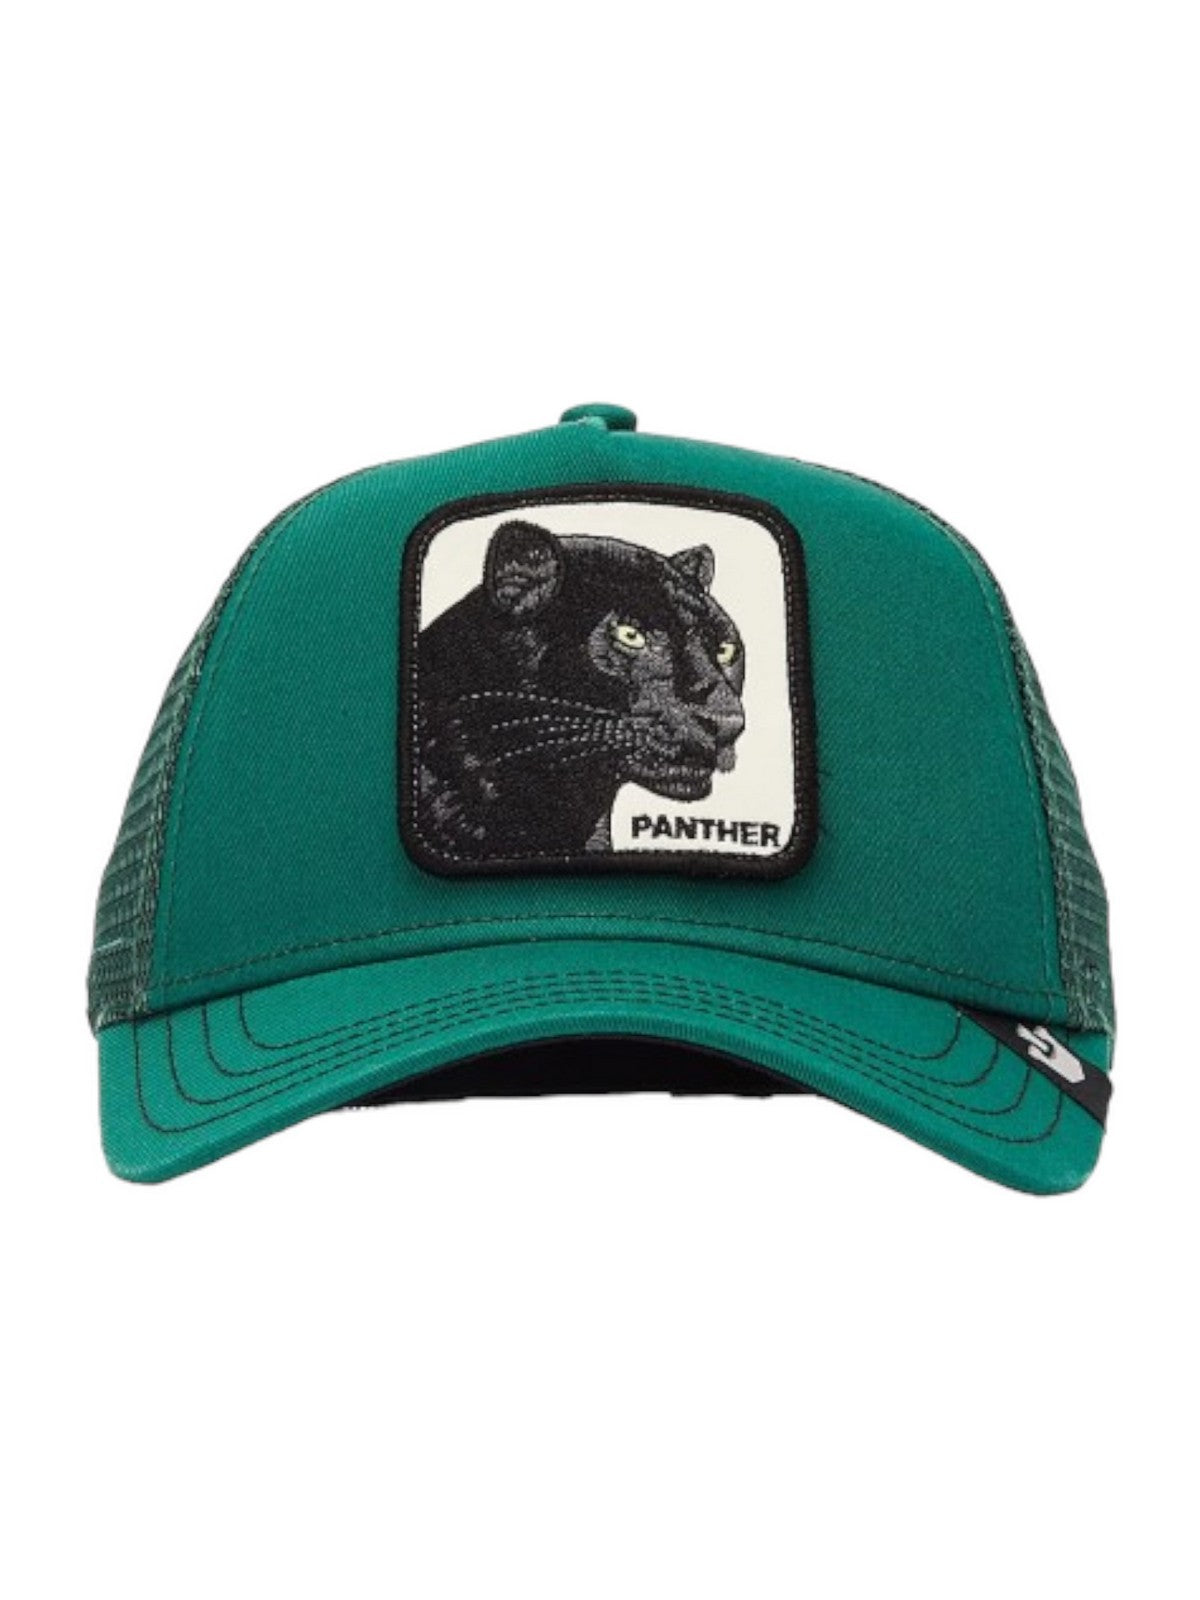 GOORIN BROS Chapeau homme The panther 101-0381-GRE Vert